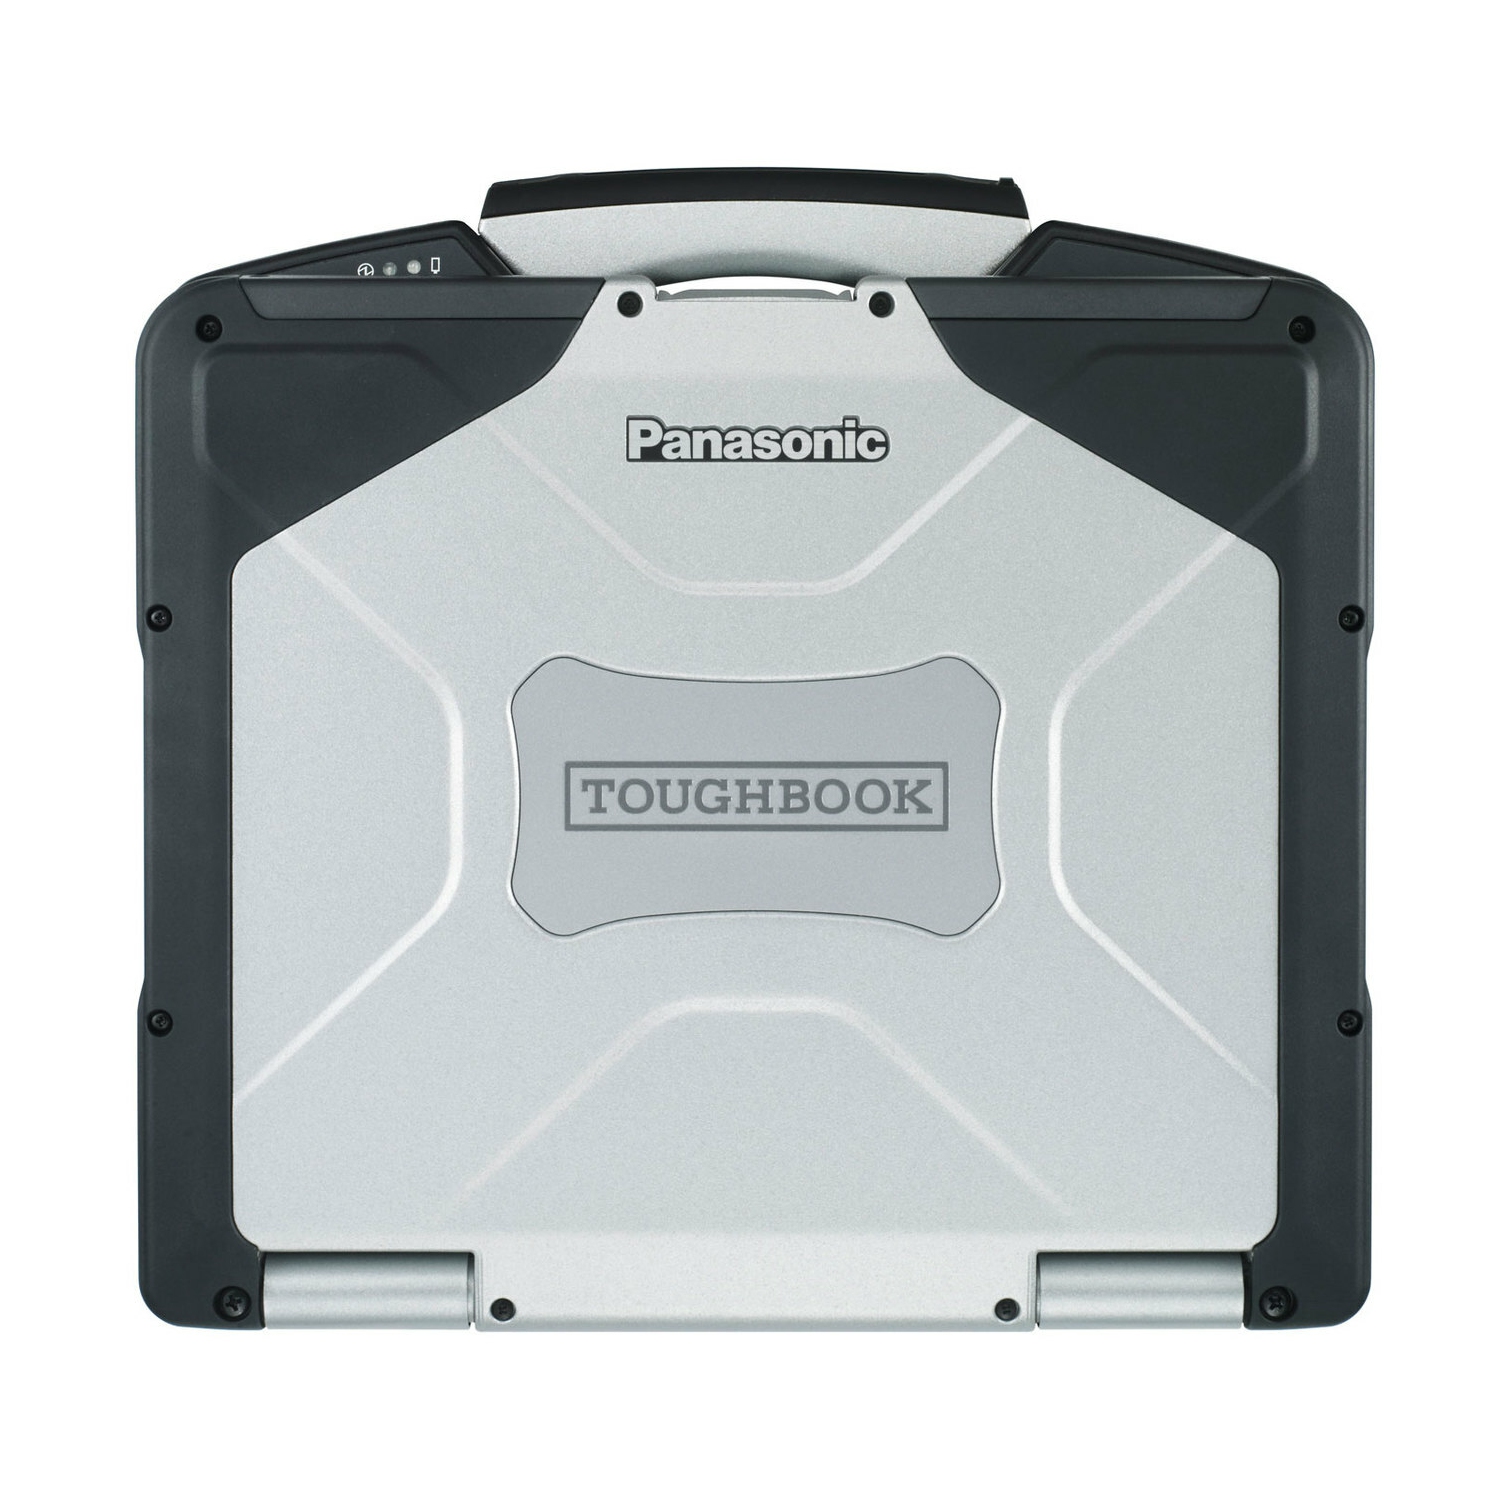 Refurbished (Excellent) - Panasonic Toughbook CF-31 Fully Rugged 2.26GHz Intel Core i3, BASIC - Seller Refurbished - Grade A